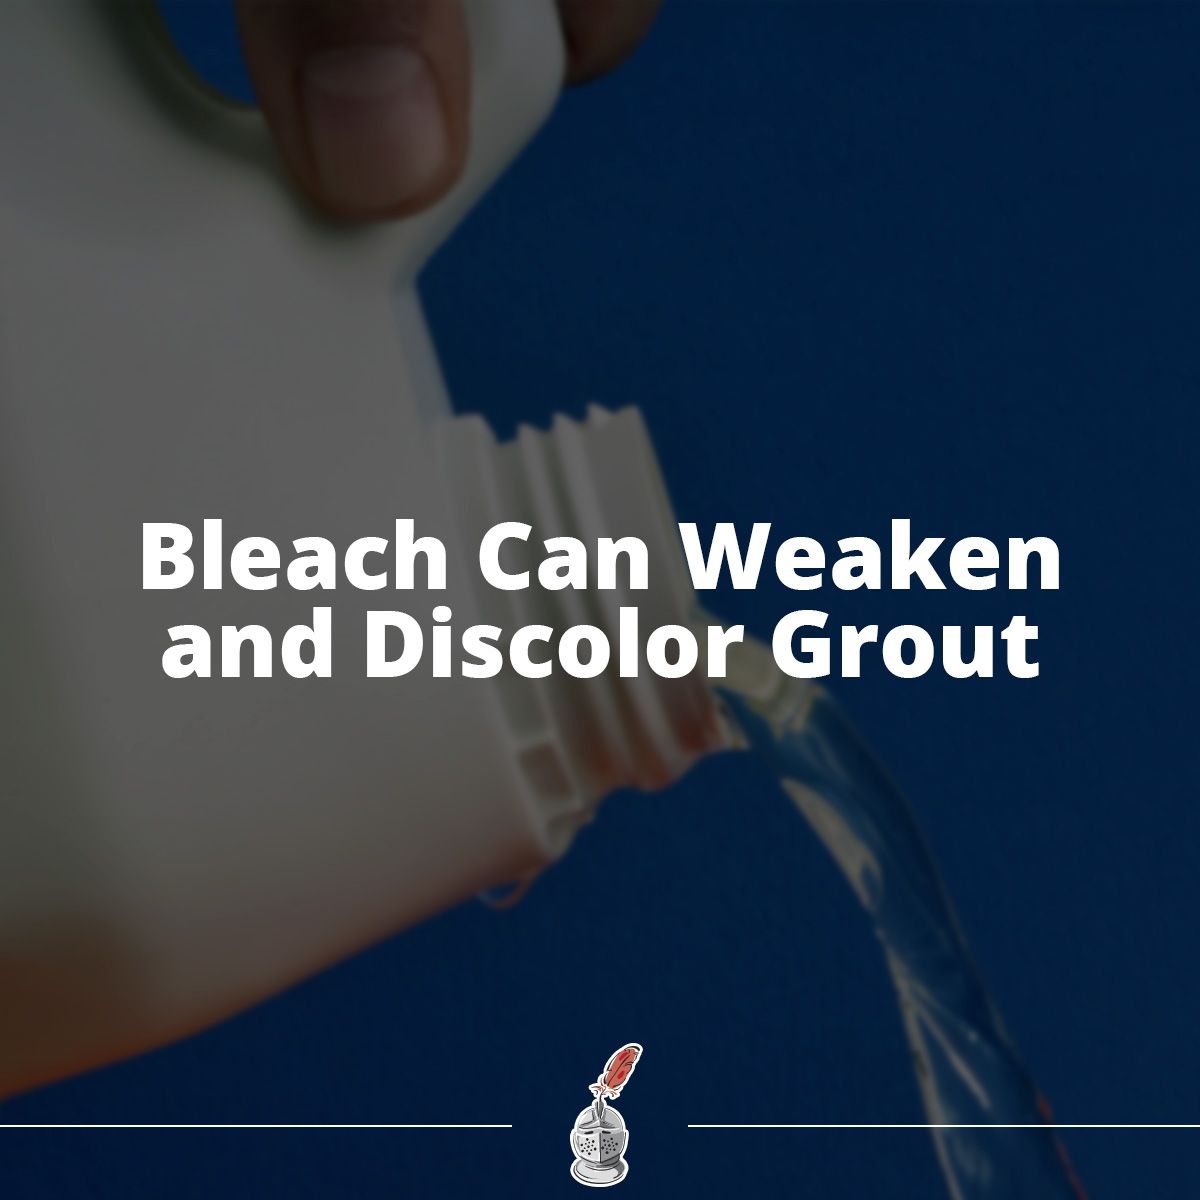 Bleach Can Weaken and Discolor Grout